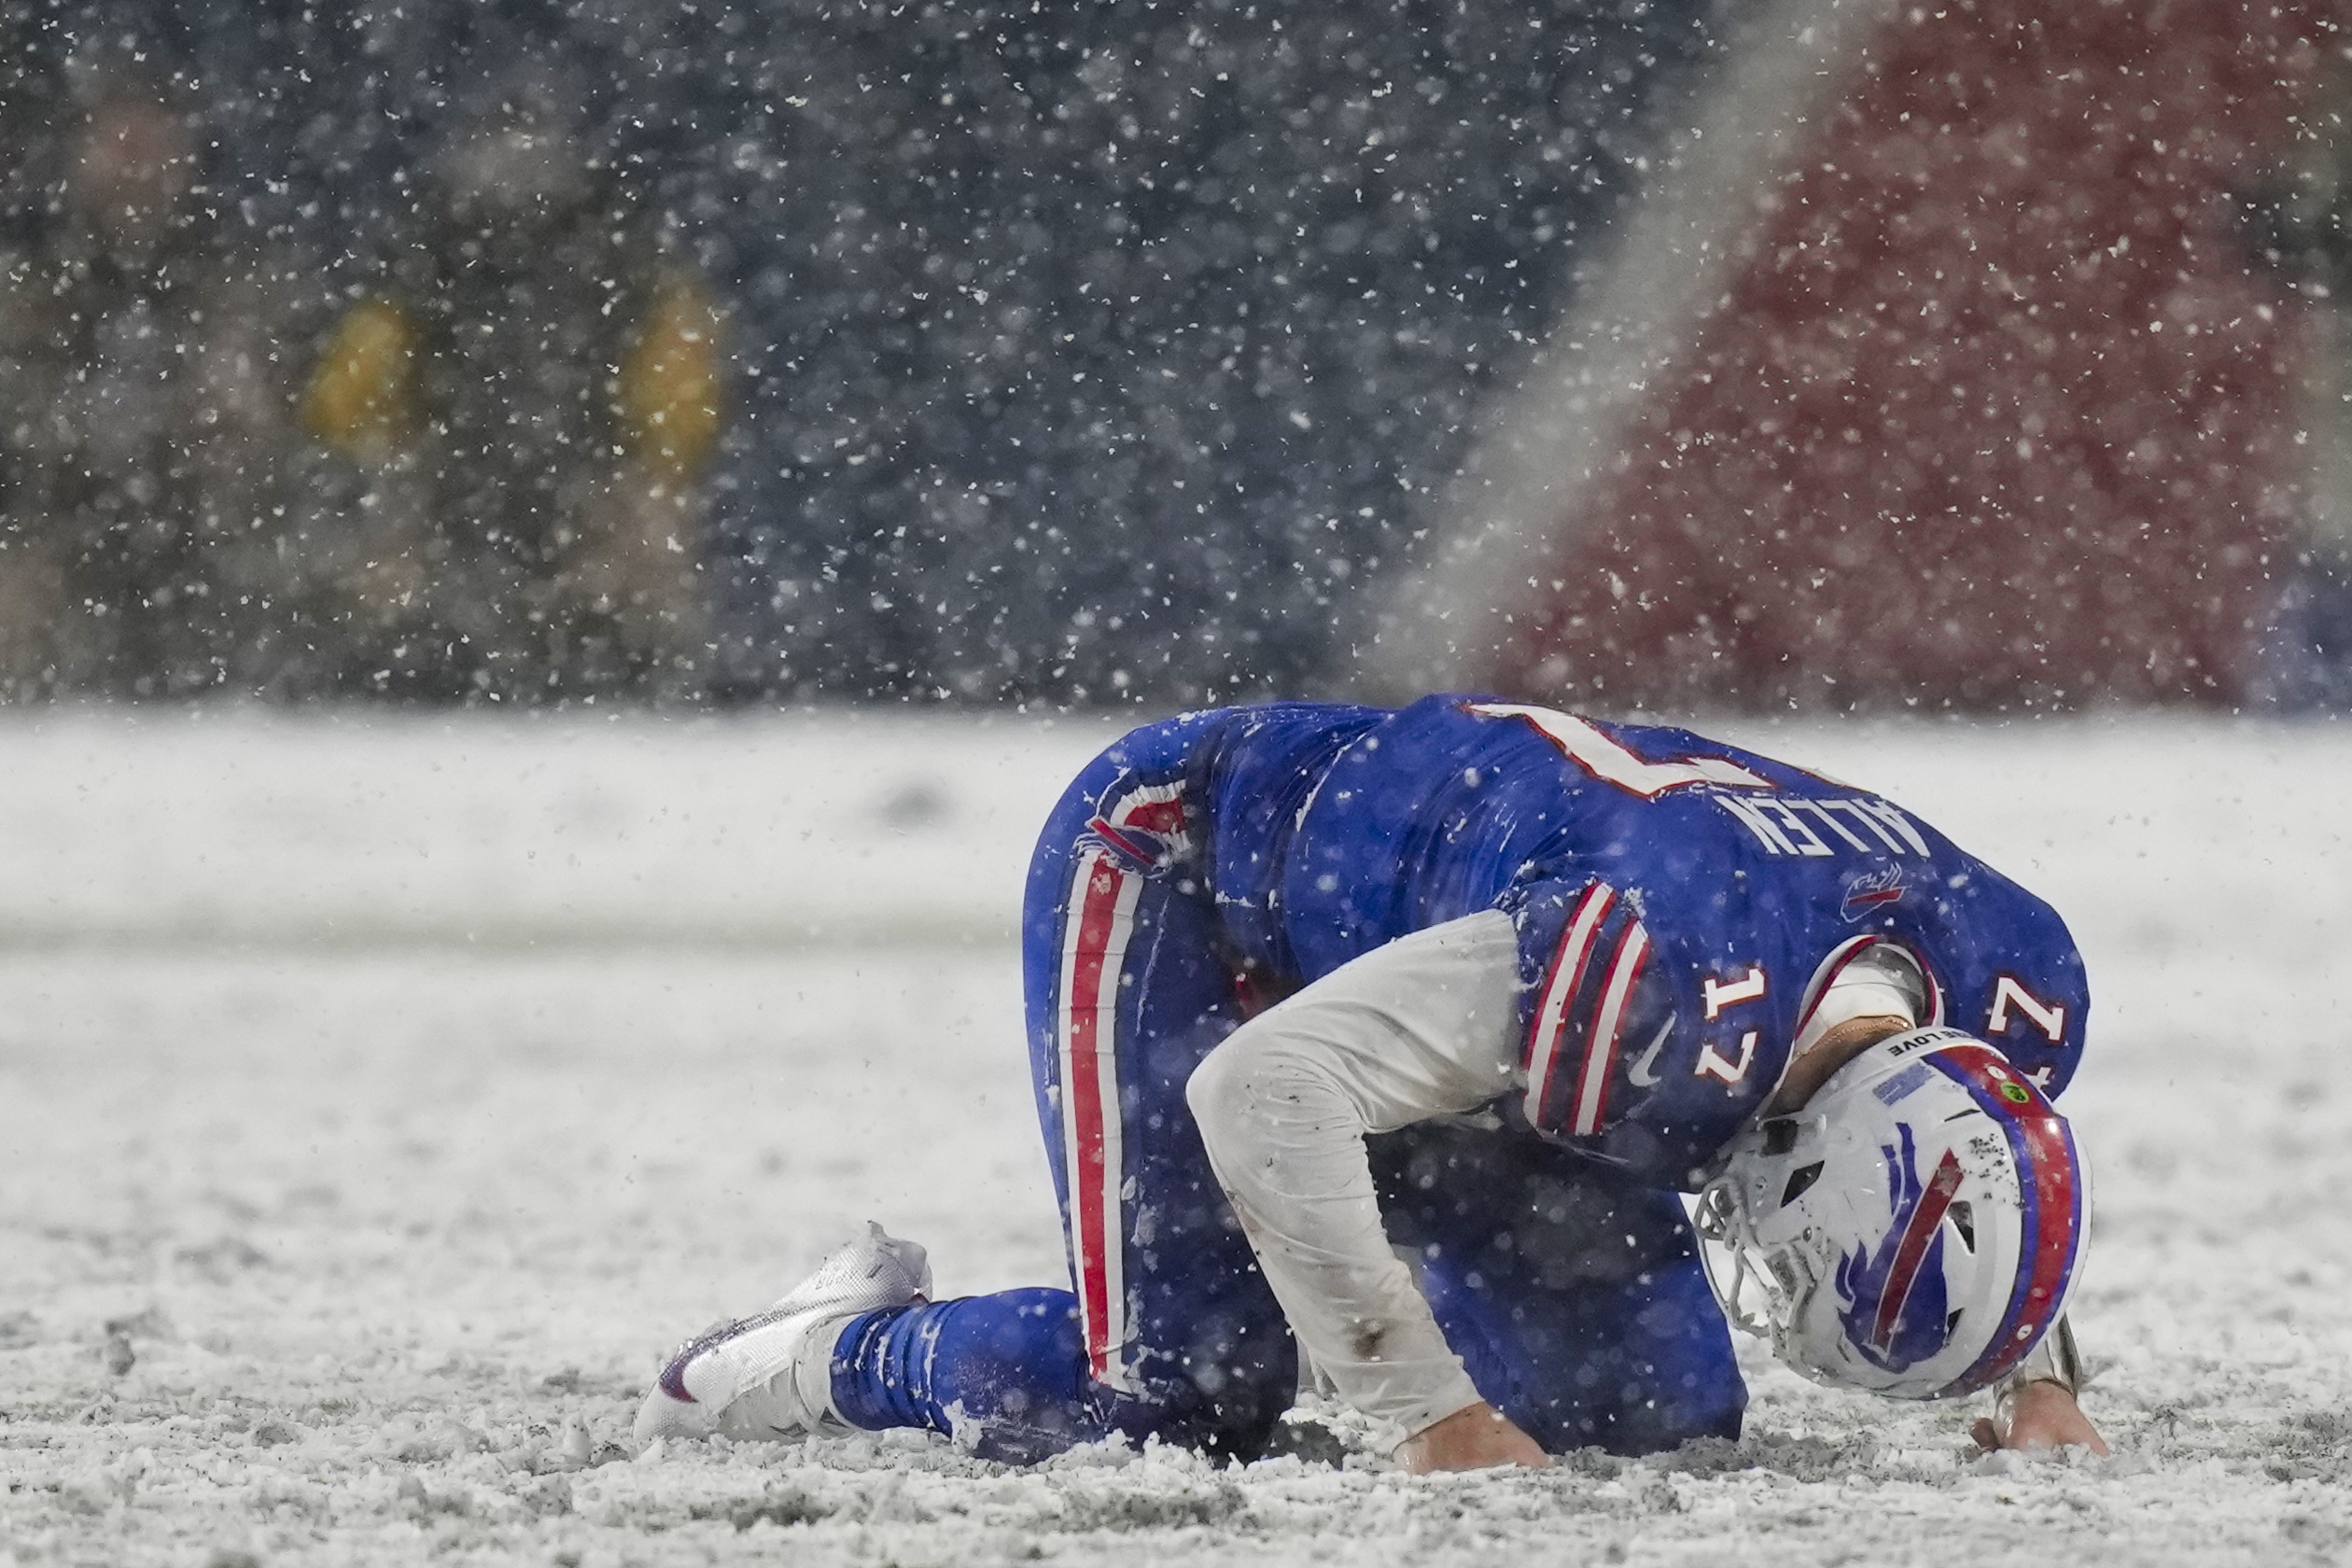 Depleted Bills produce a dud in playoff loss to Bengals